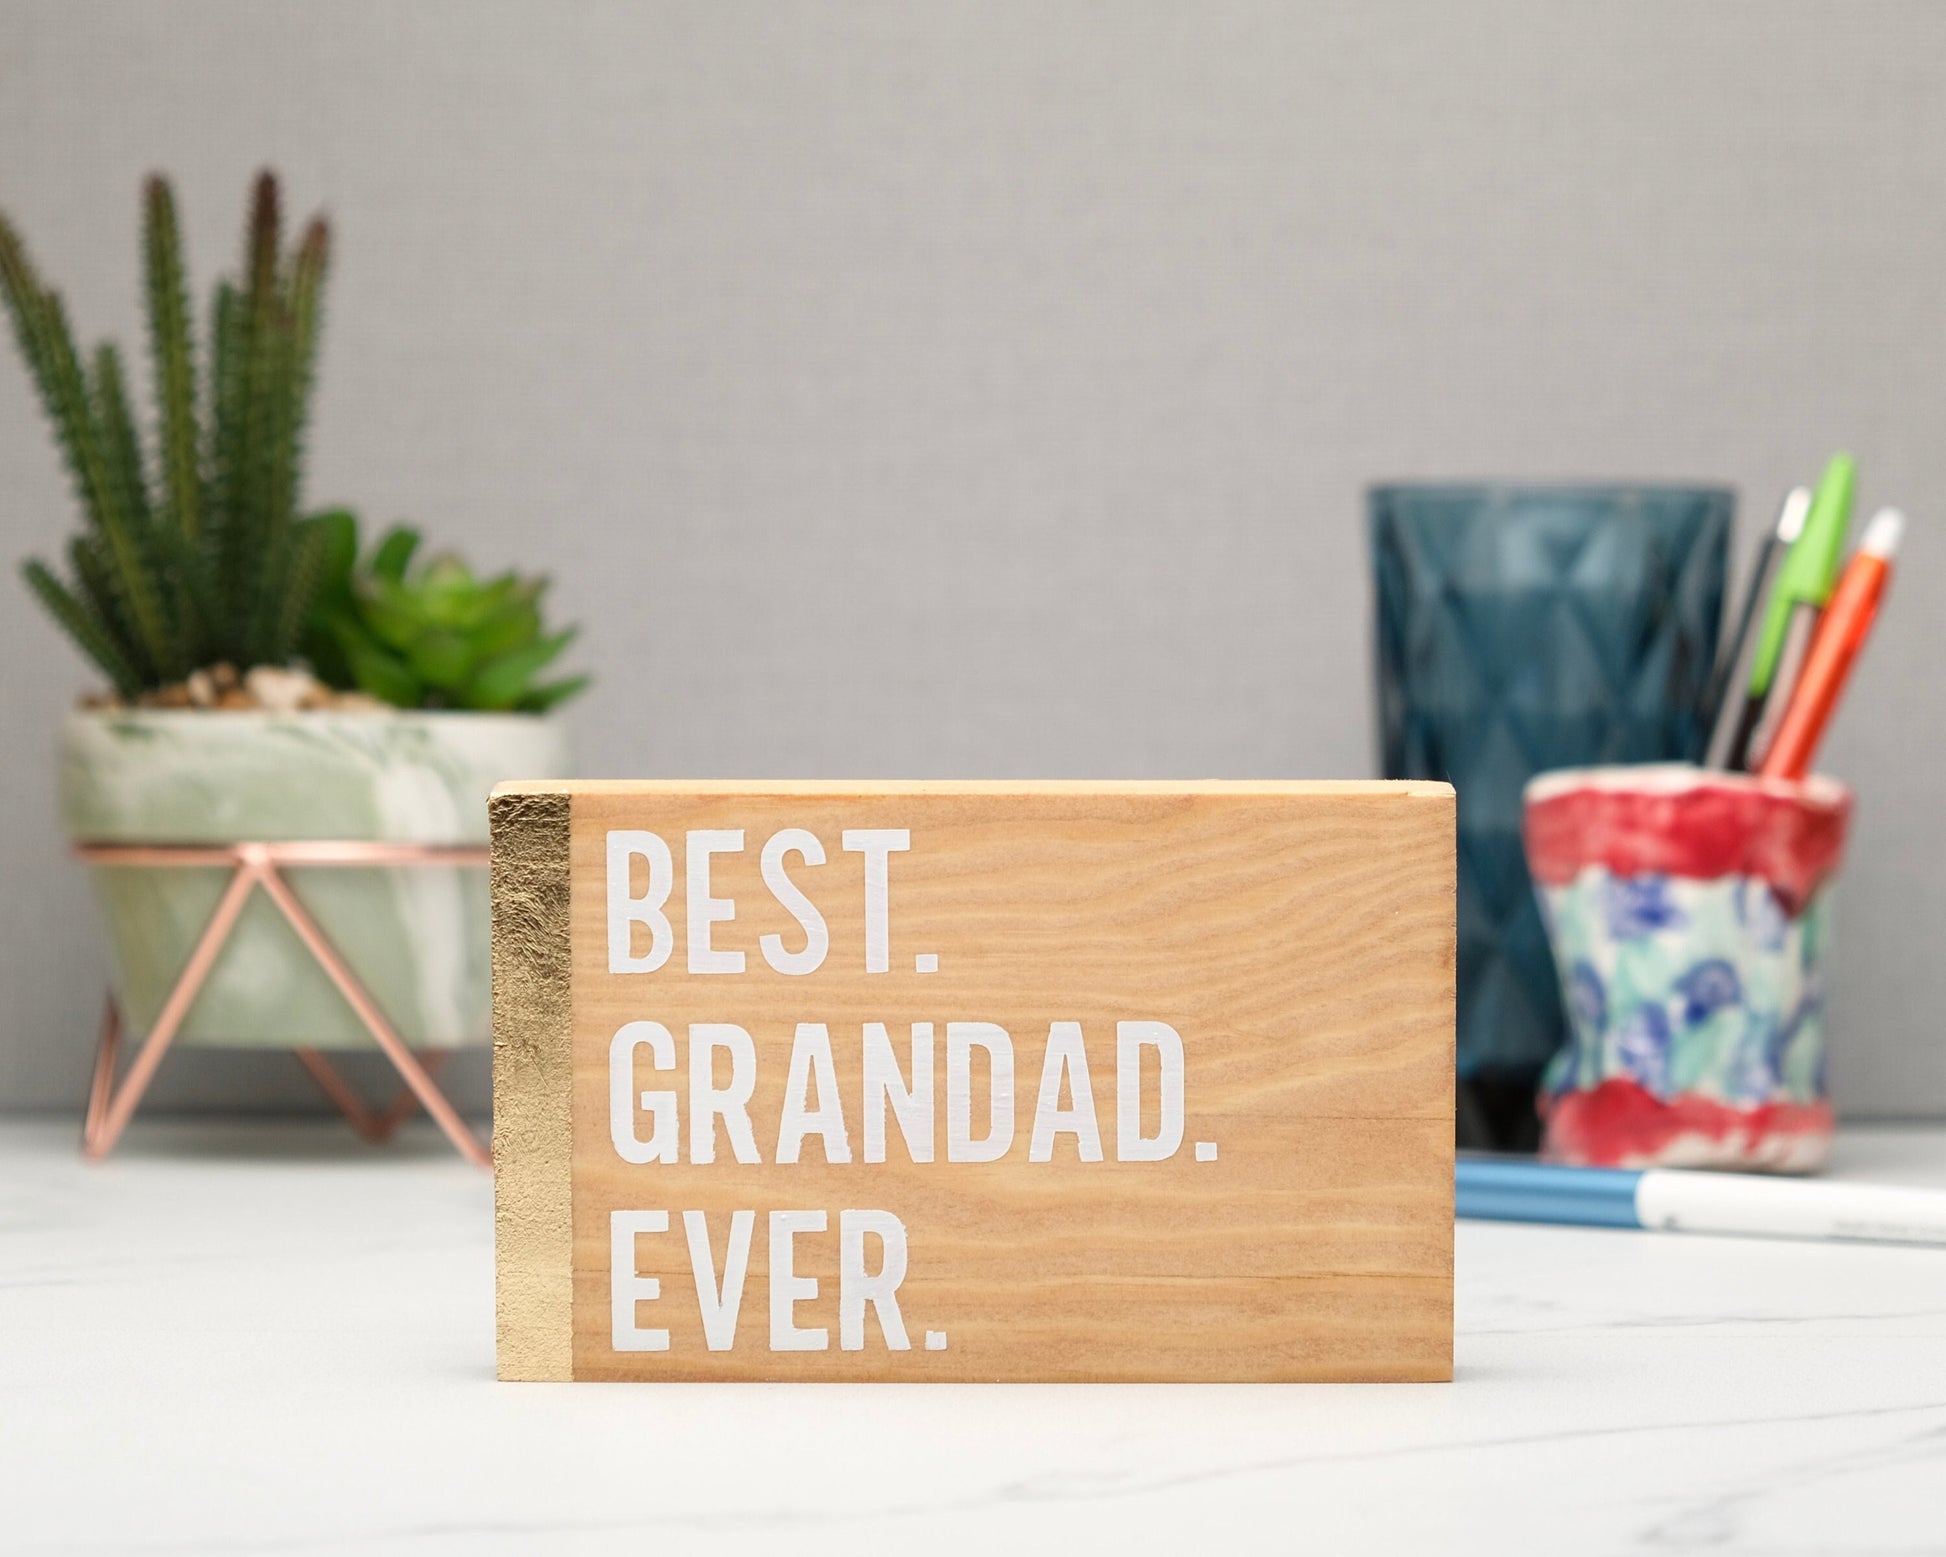 Best Grandad Grandpa Ever Personalized Wood Block Sign, Best Dad Ever, Handmade Wooden Dad Gift, Self Care Inspirational Quotes, Birthday